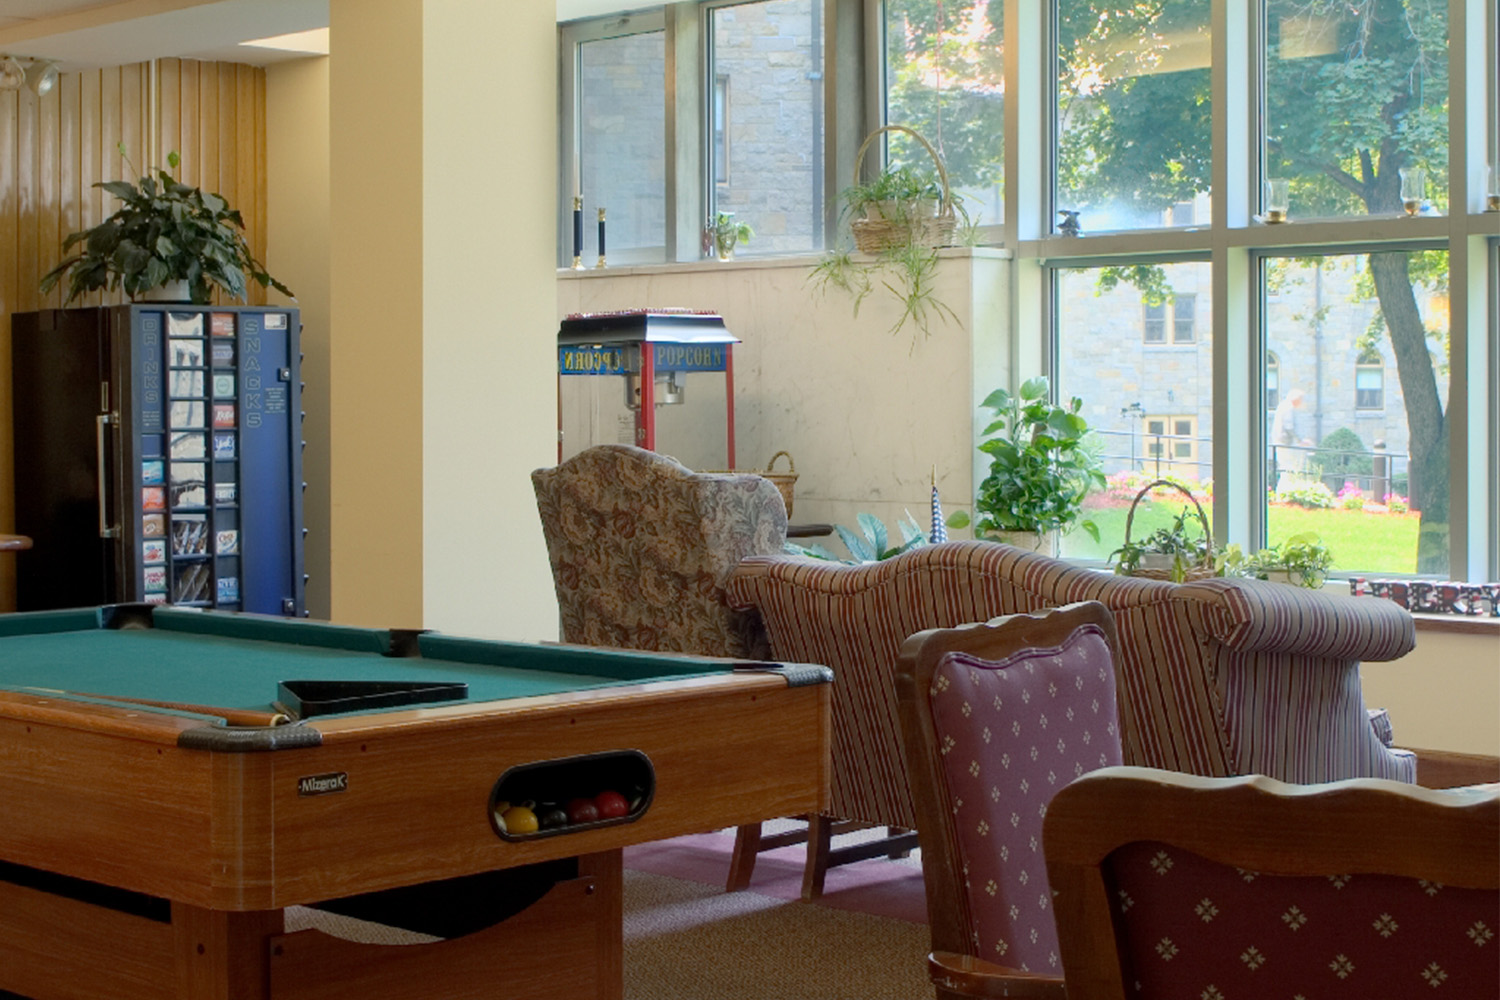 Classic pool table with vending machine, and large window allowing ample lighting 